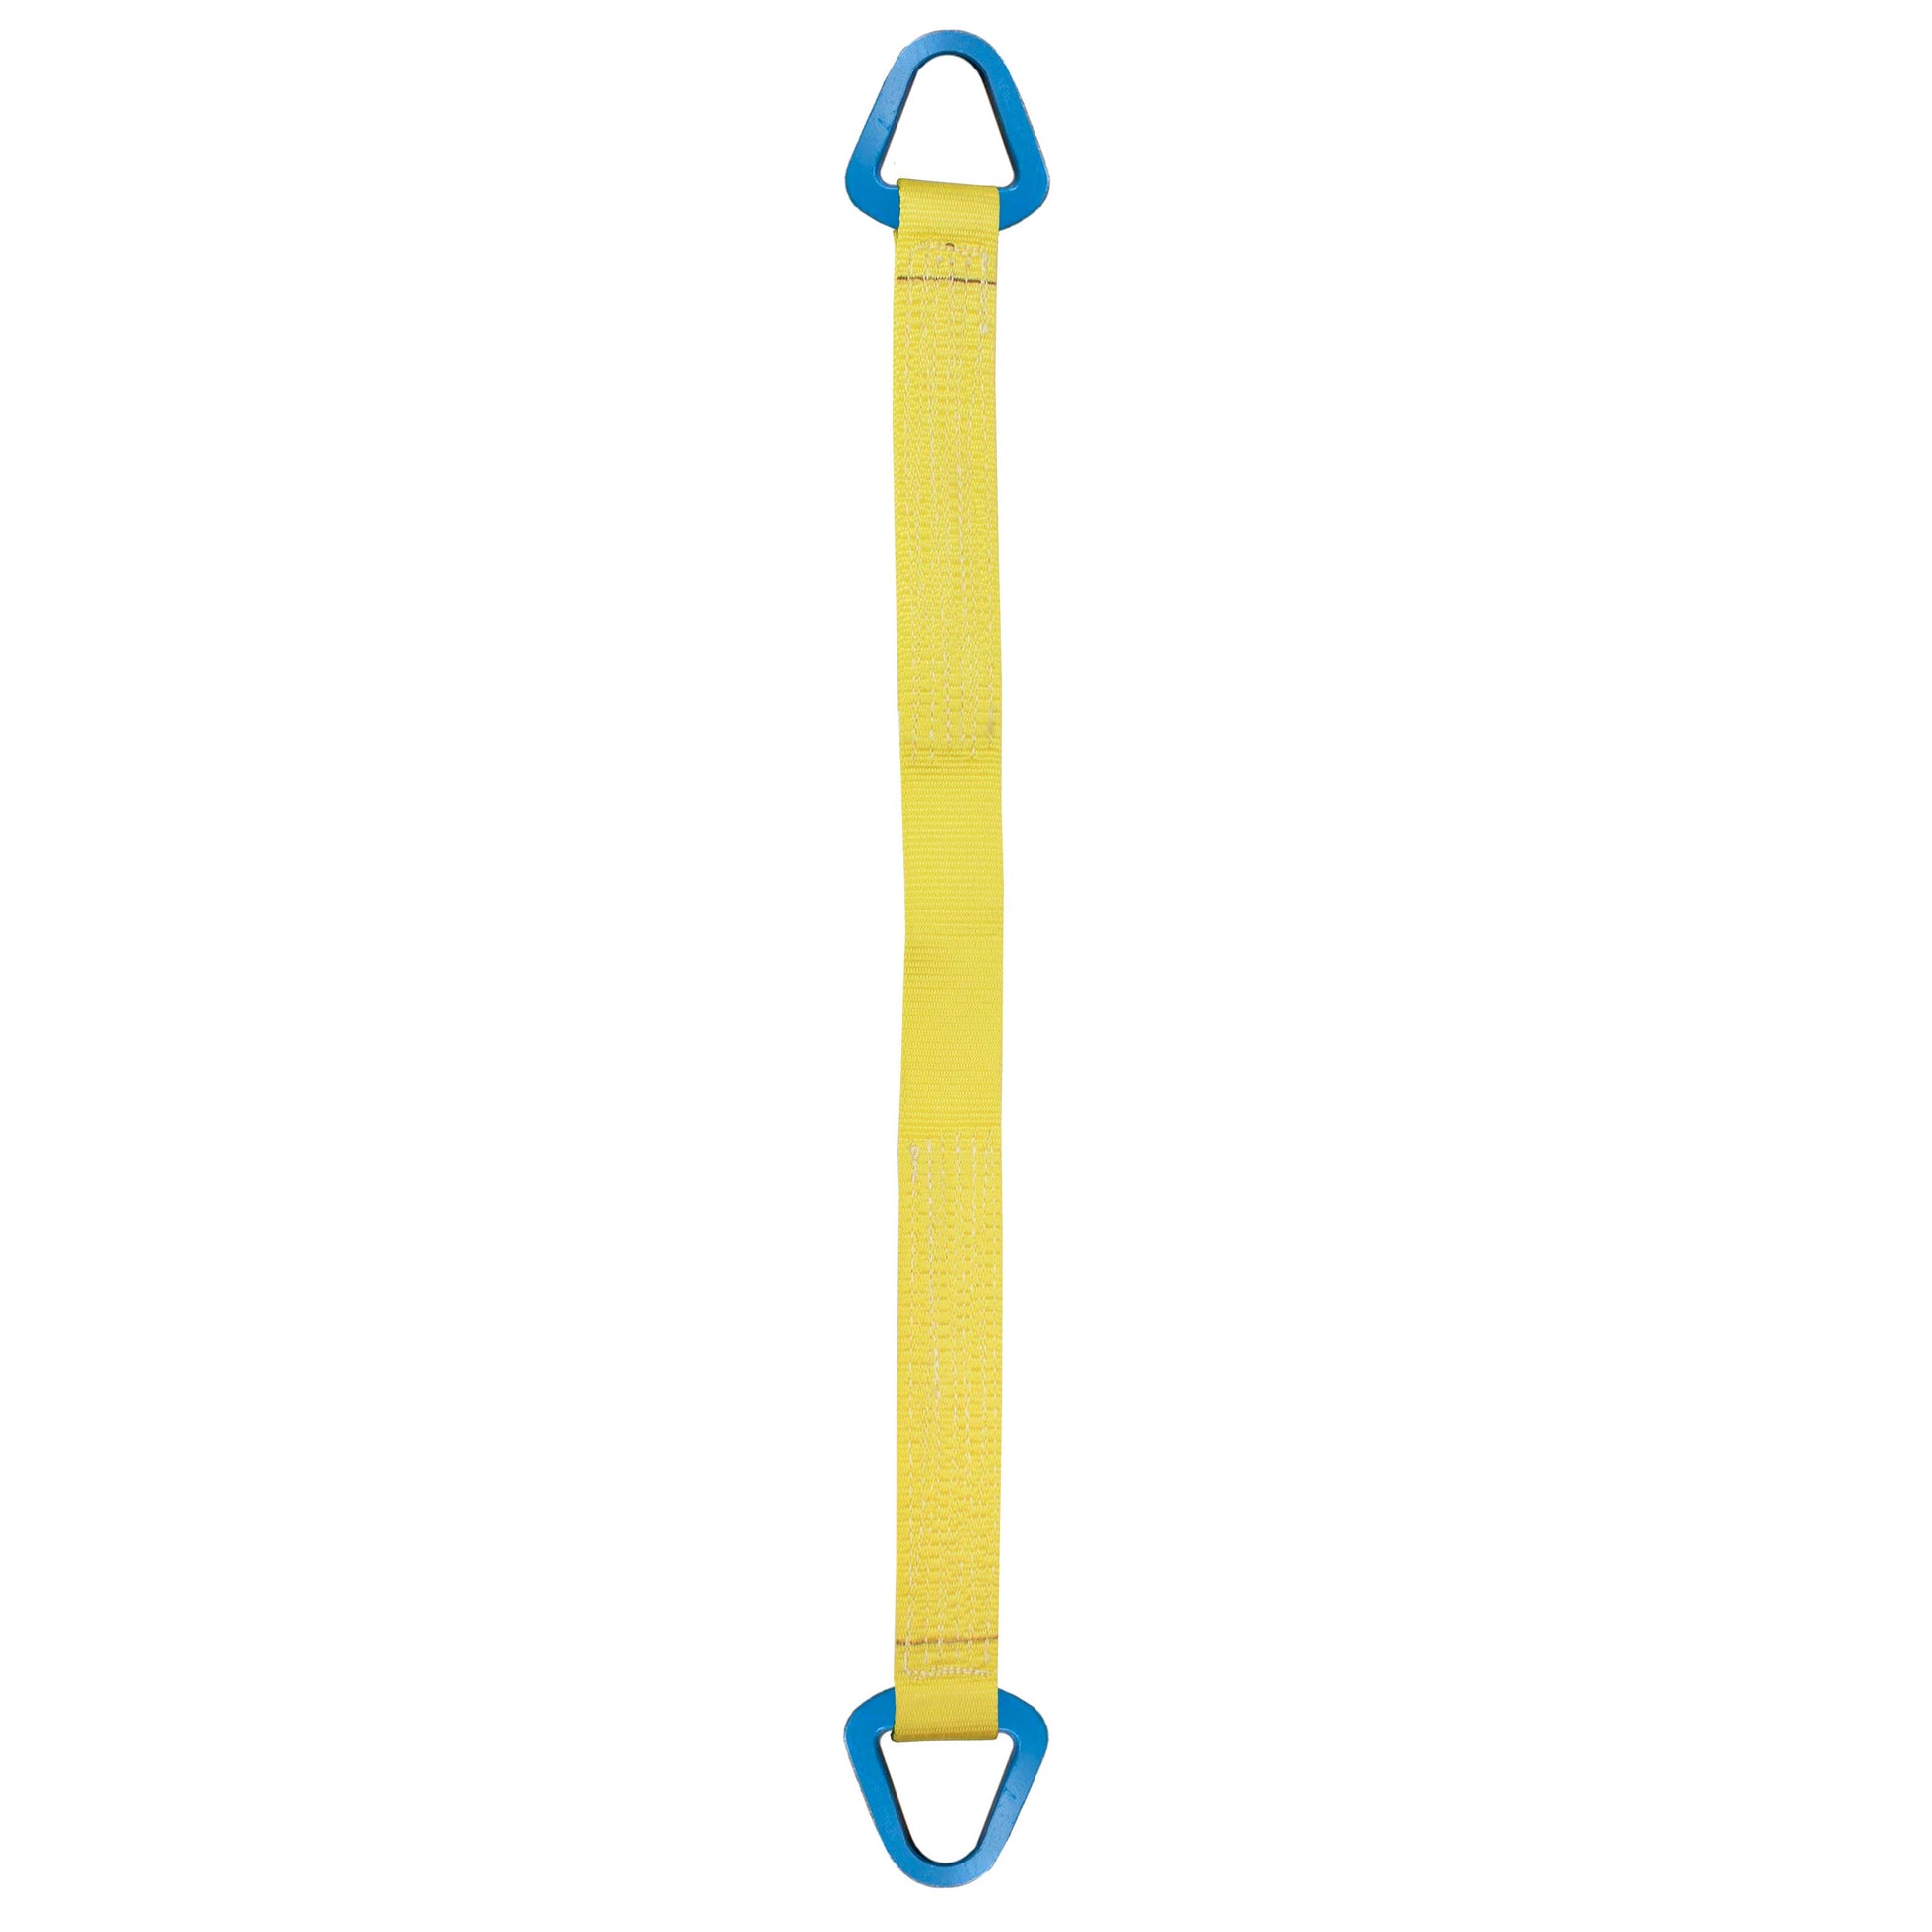 Nylon Lifting Sling Triangle 8 inch x 3 foot 1ply image 1 of 2